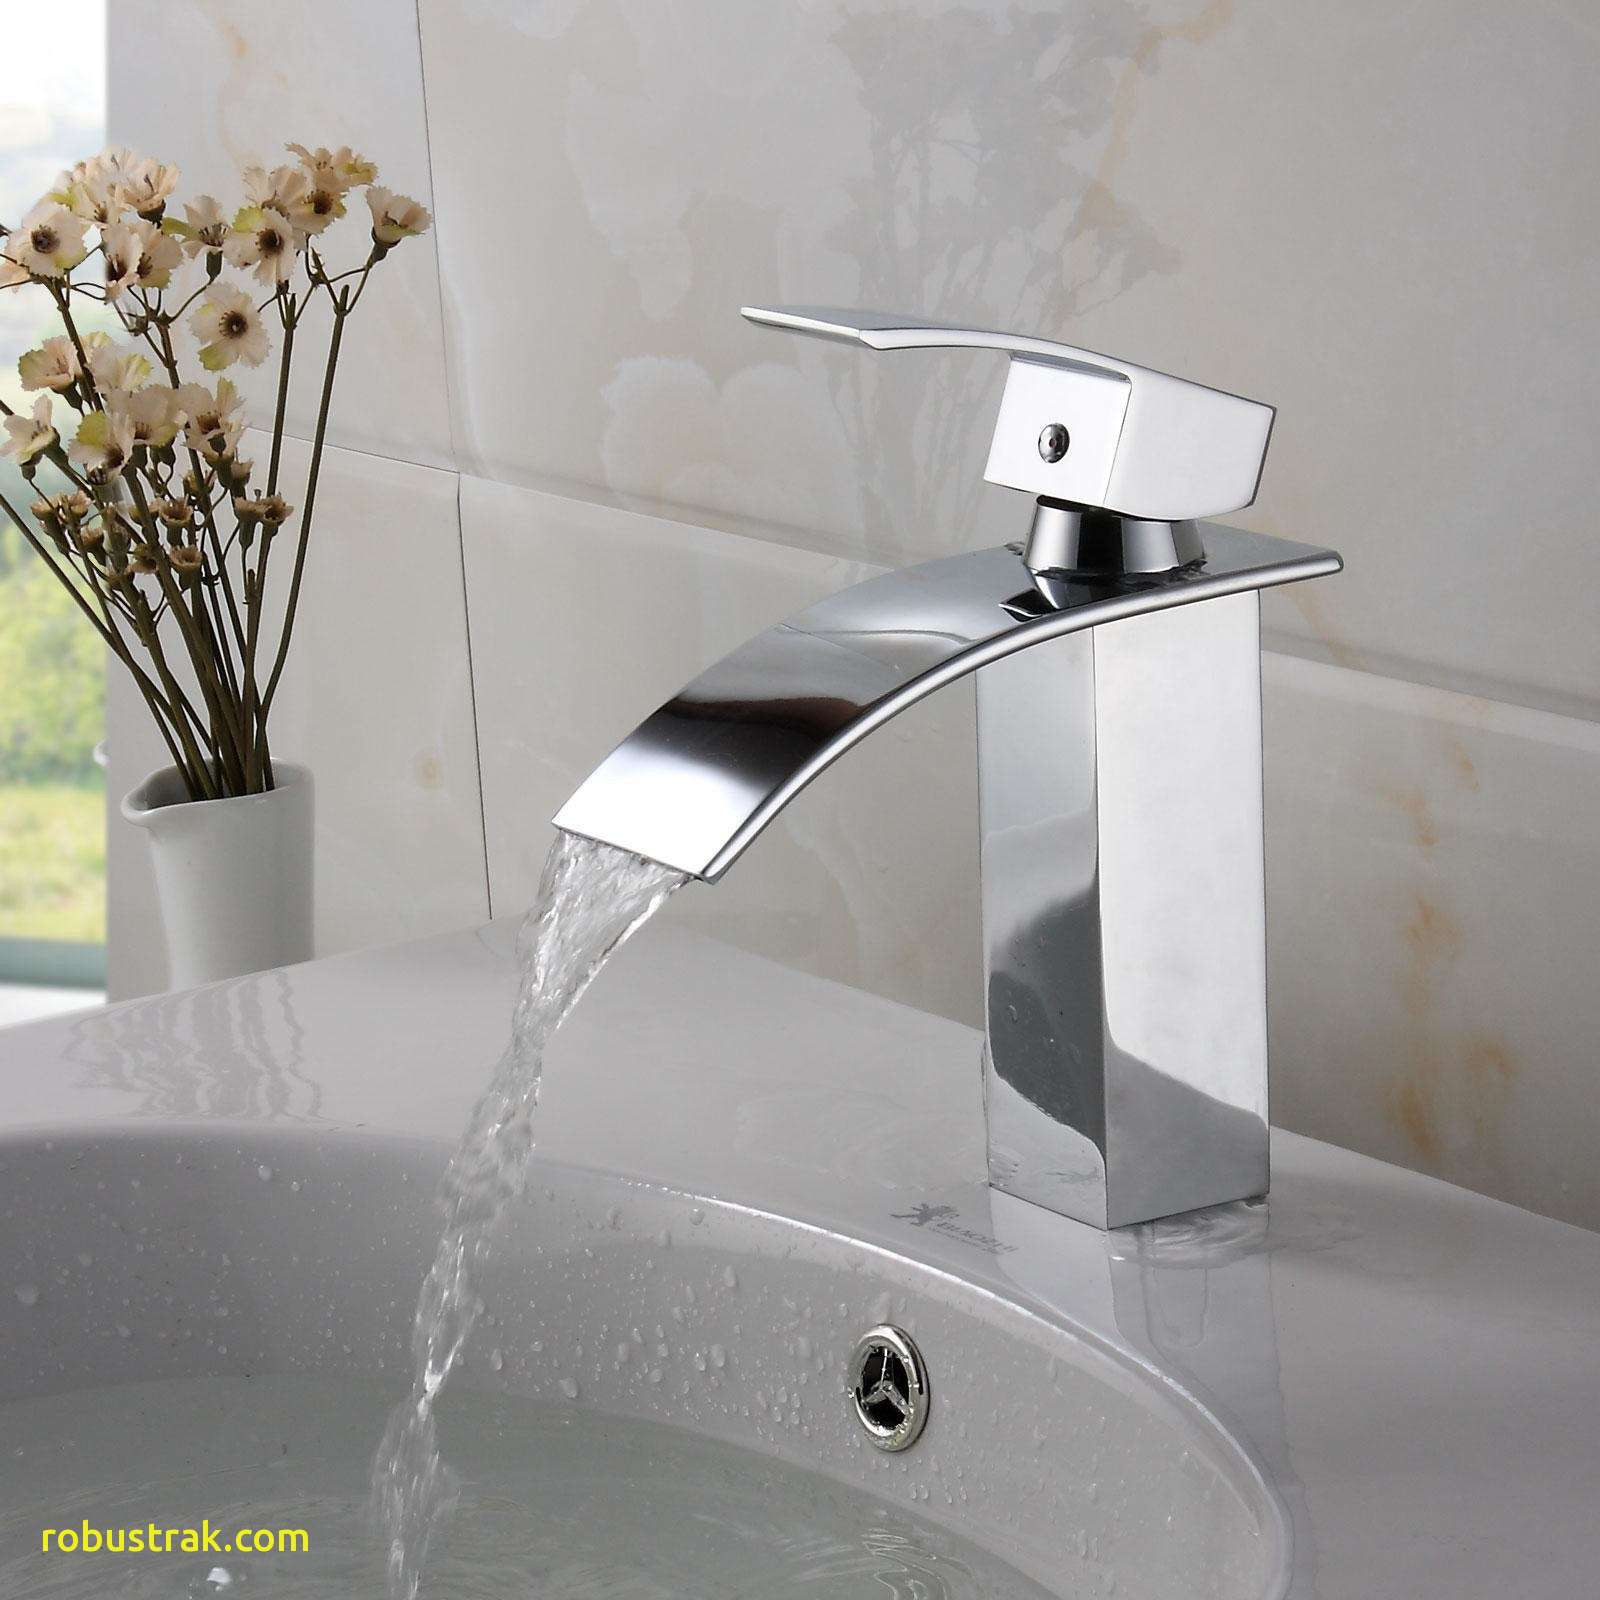 wide glass vase of fresh wide bathroom sink two faucets home design ideas with modern bathroom sink faucets bathrooms design gold sinks home depot modernh faucetsi 0d inspiring